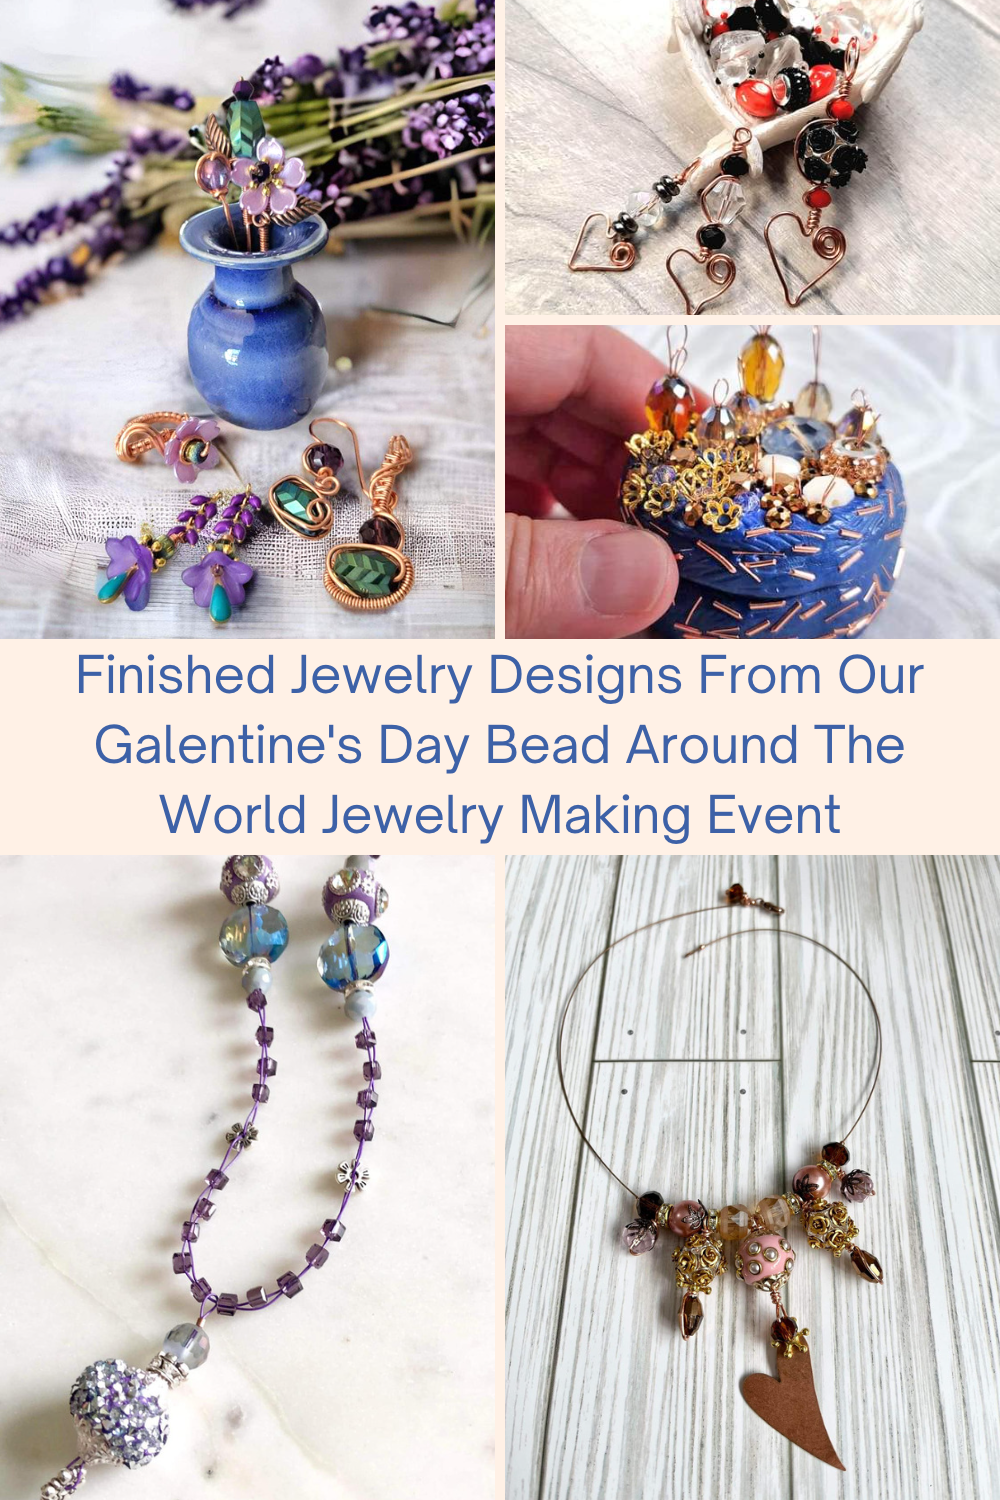 Finished Jewelry Designs From Our Galentine's Day Bead Around The World Jewelry Making Event Collage